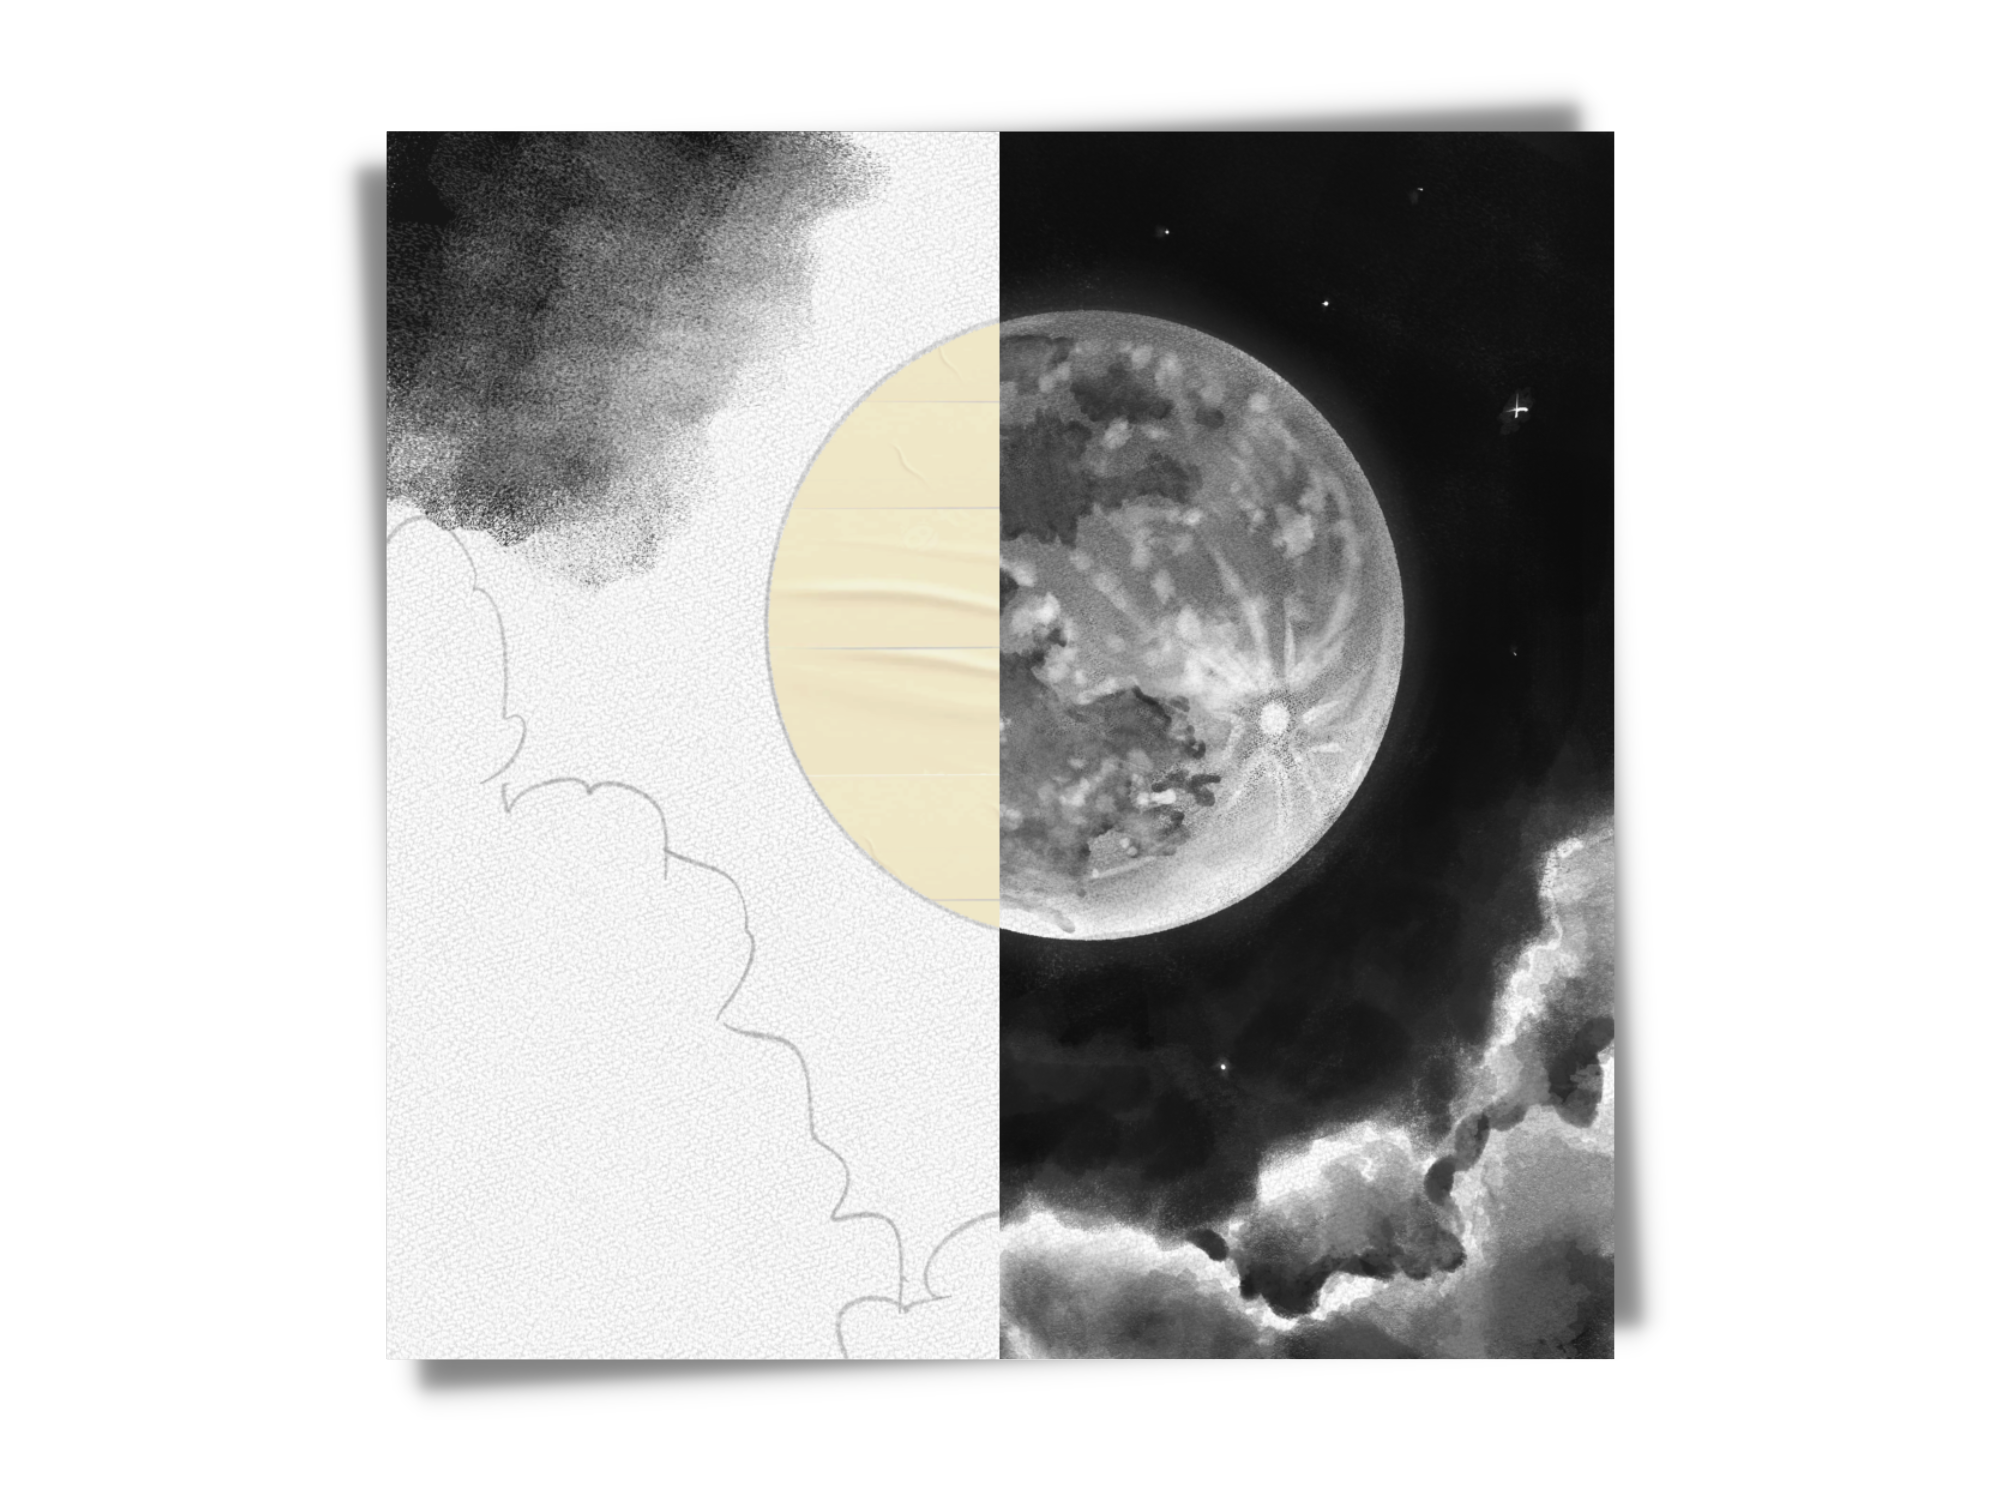 how to draw the moon